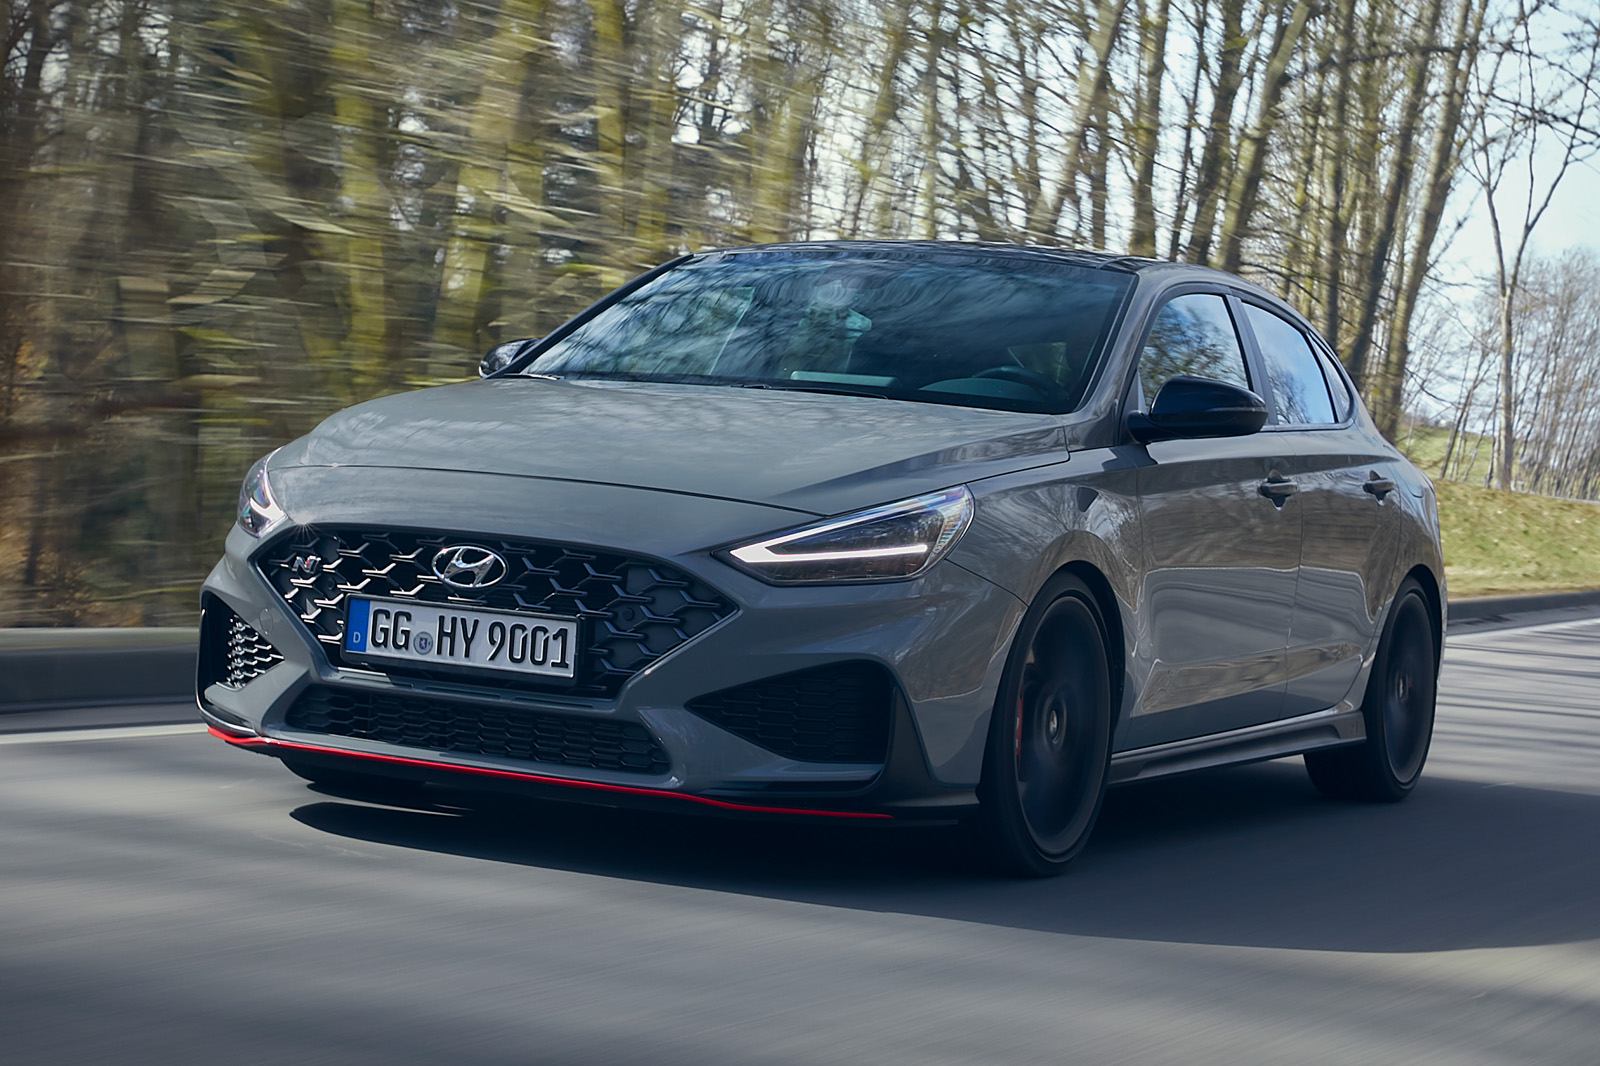 https://www.autocar.co.uk/sites/autocar.co.uk/files/images/car-reviews/first-drives/legacy/1-hyundai-i30-fastback-n-dct-2021-fd-hero-front.jpg